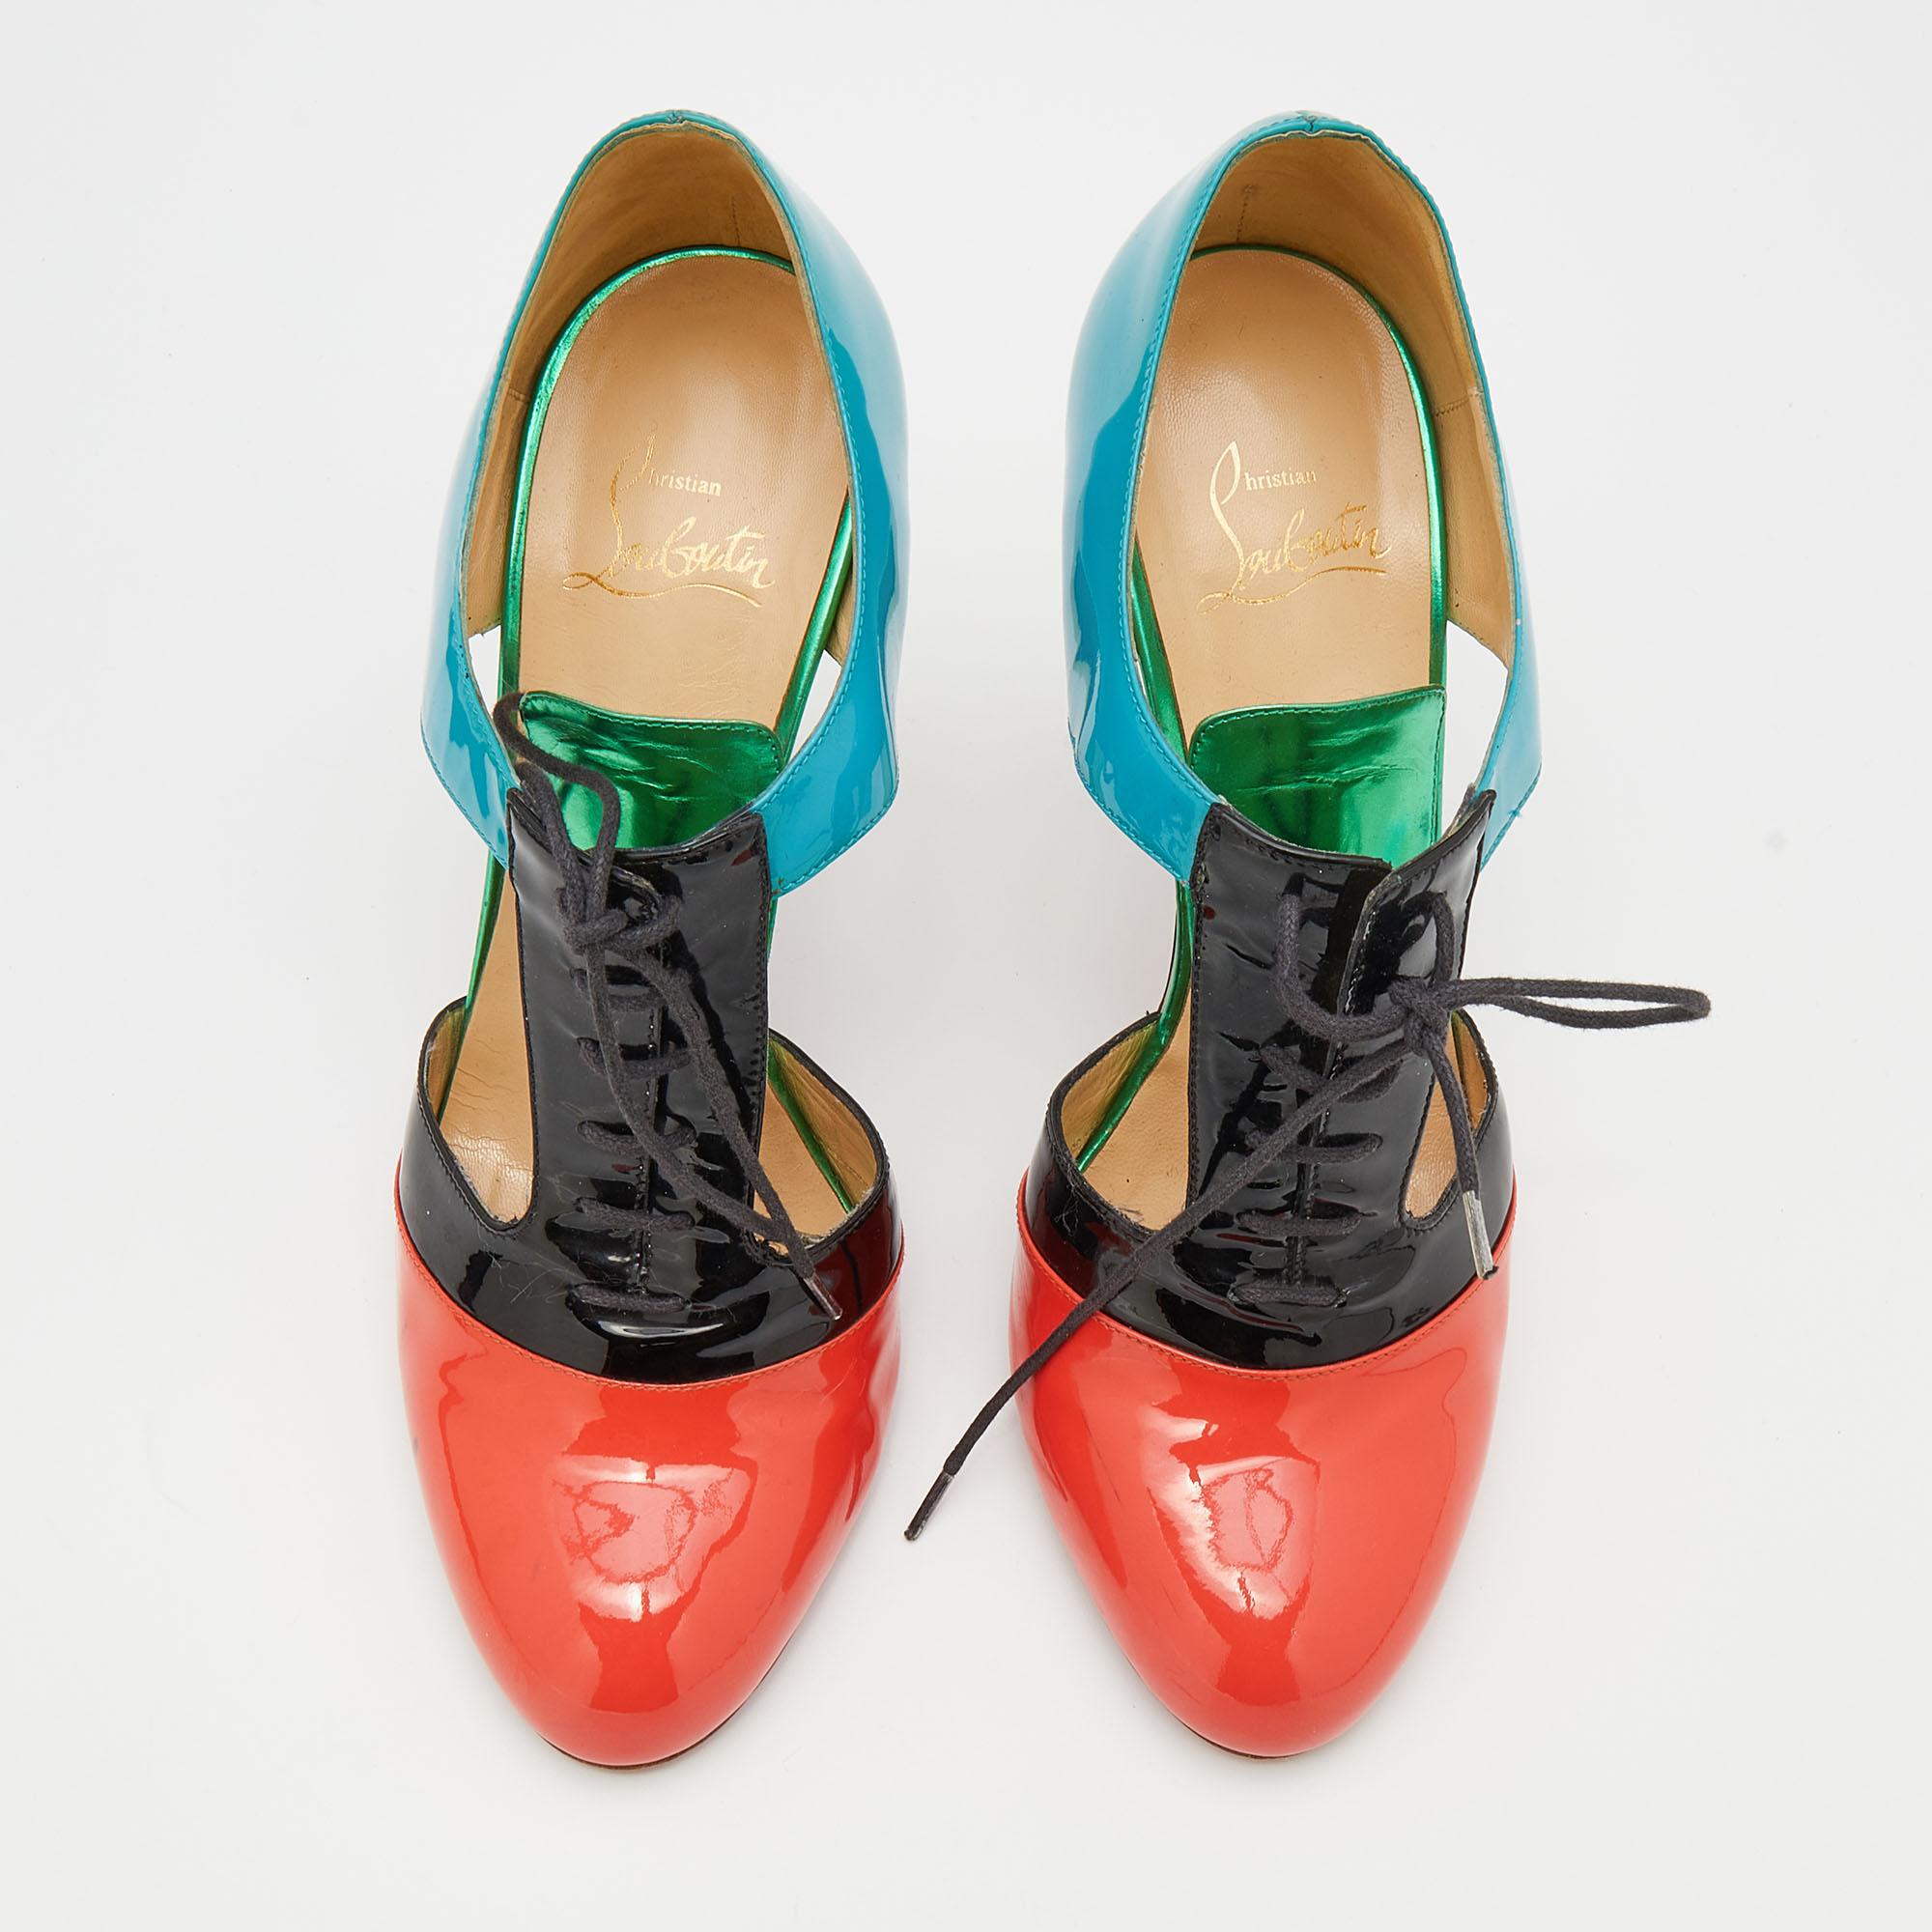 Christian Louboutin exudes its high craftsmanship and unique fashion taste with these stunning booties. They are brimming with exquisite details like the cutouts, the multicolored patent leather exterior, the laces, and the 11 cm heels. Grab this